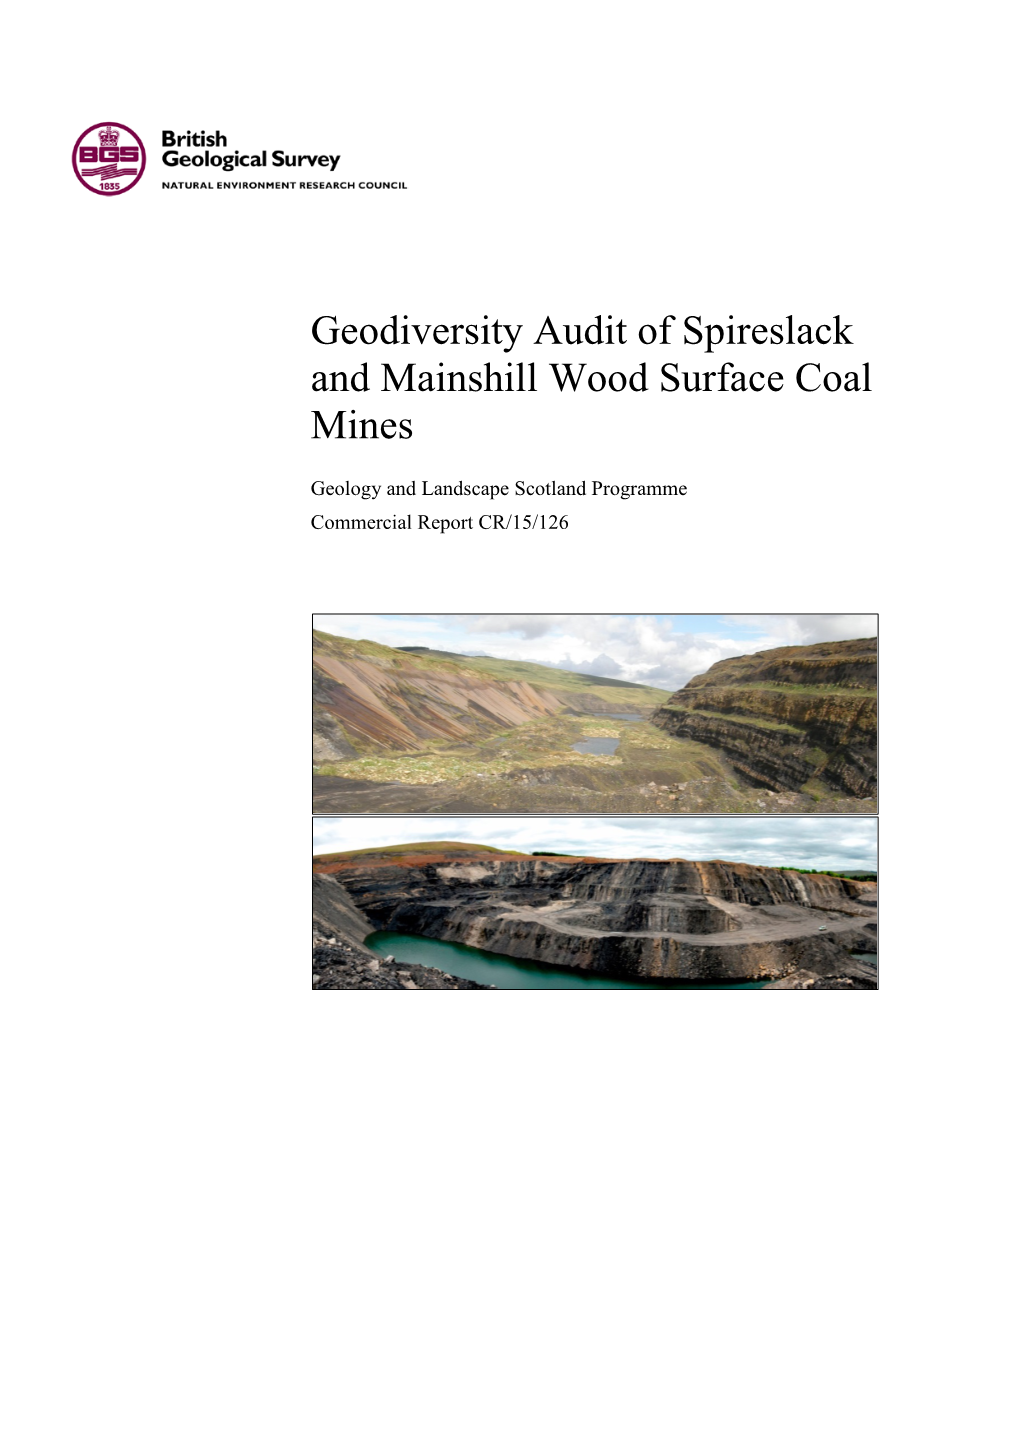 Geodiversity Audit of Spireslack and Mainshill Wood Surface Coal Mines